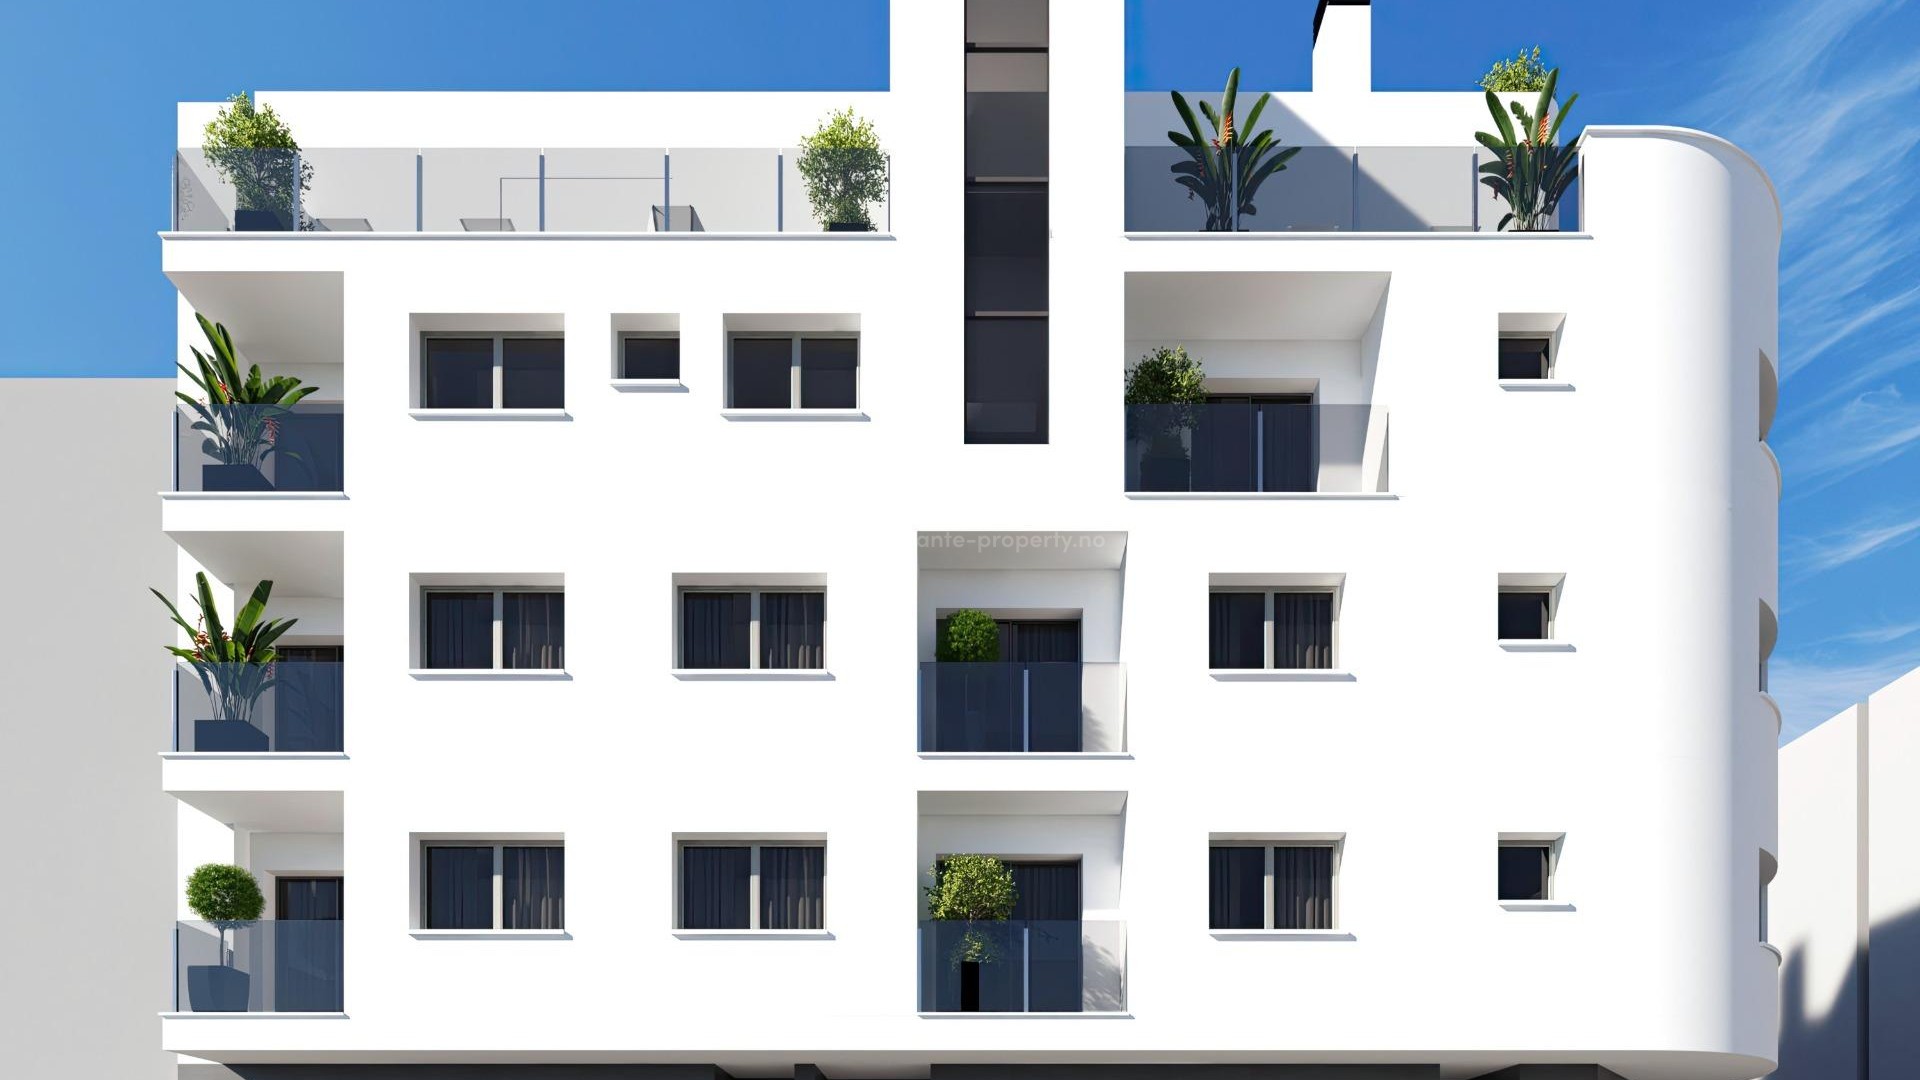 New modern apartments with high quality finishes in Torrevieja, 1/2 bedroom, 1/2 bathroom, open kitchen and living room, a beautiful shared solarium